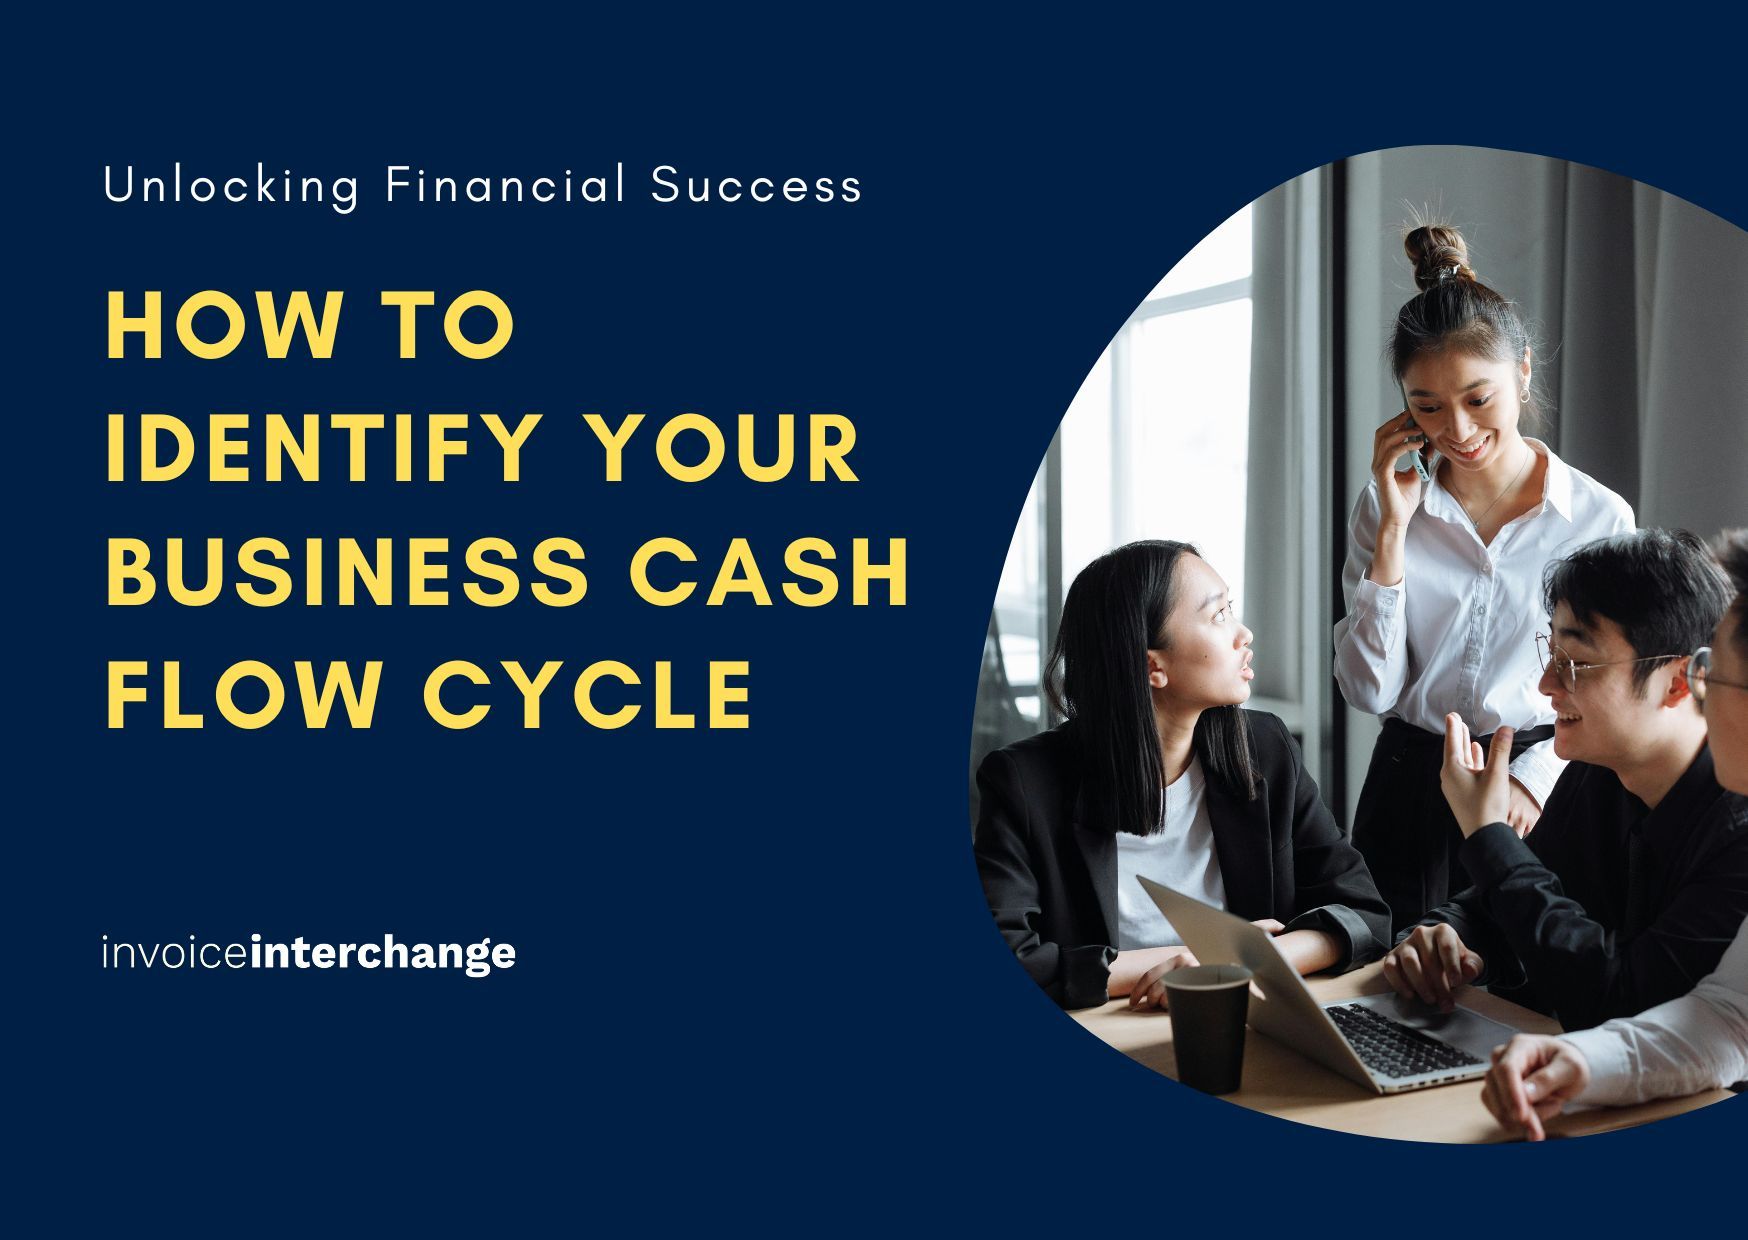 Unlocking Financial Success: How to Identify Your Business Cash Flow Cycle